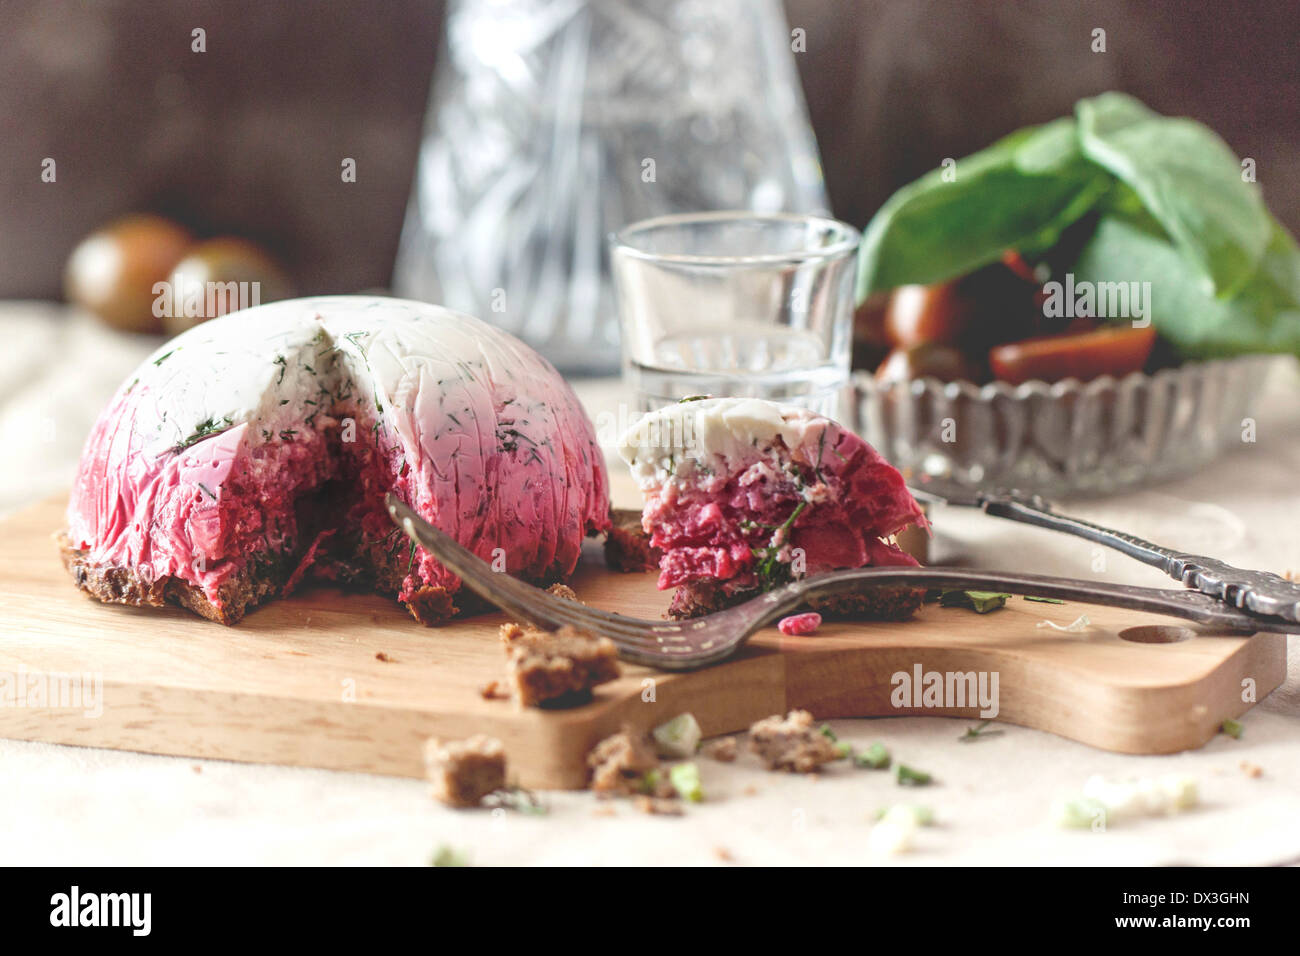 Delicious snack salad herring under a fur coat on wooden board with fork and russian vodka Stock Photo